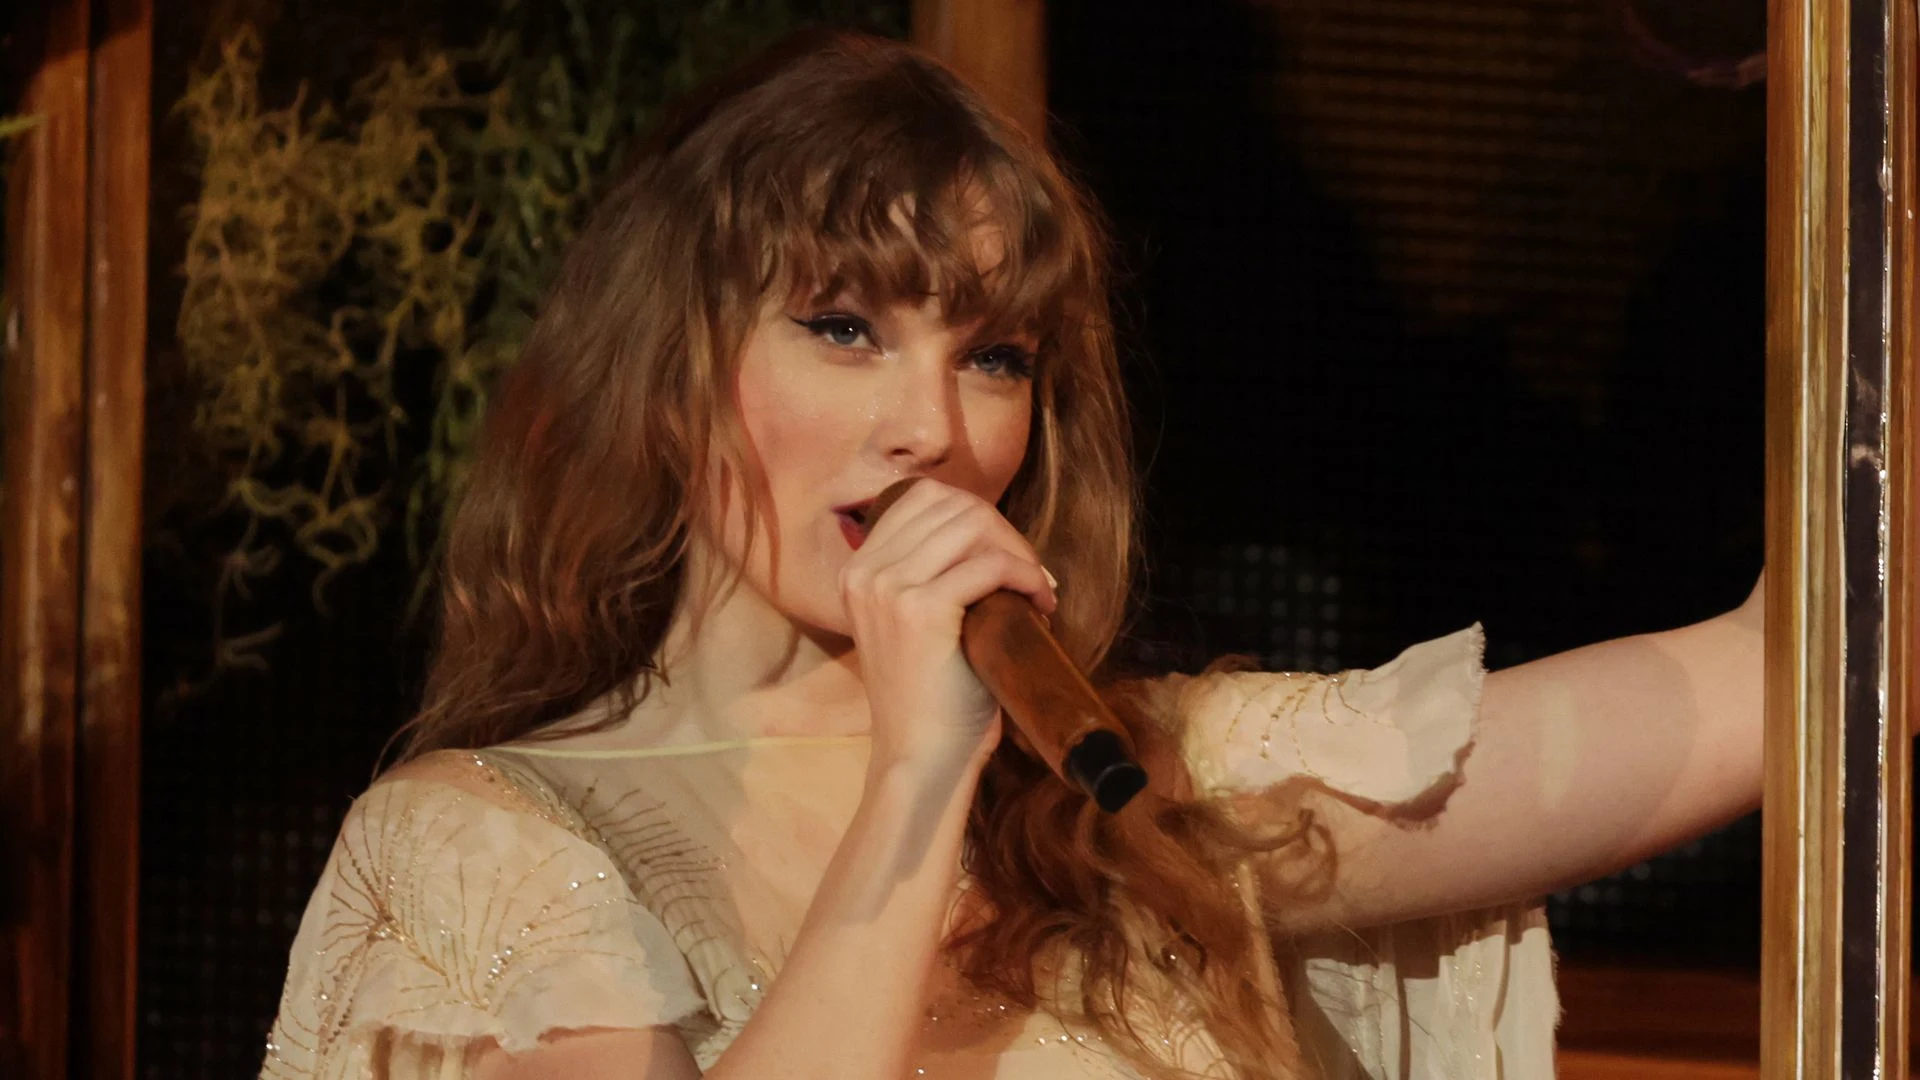 "Taylor Swift Shares Rare Family Insights About Mom Andrea During Singapore Performance"